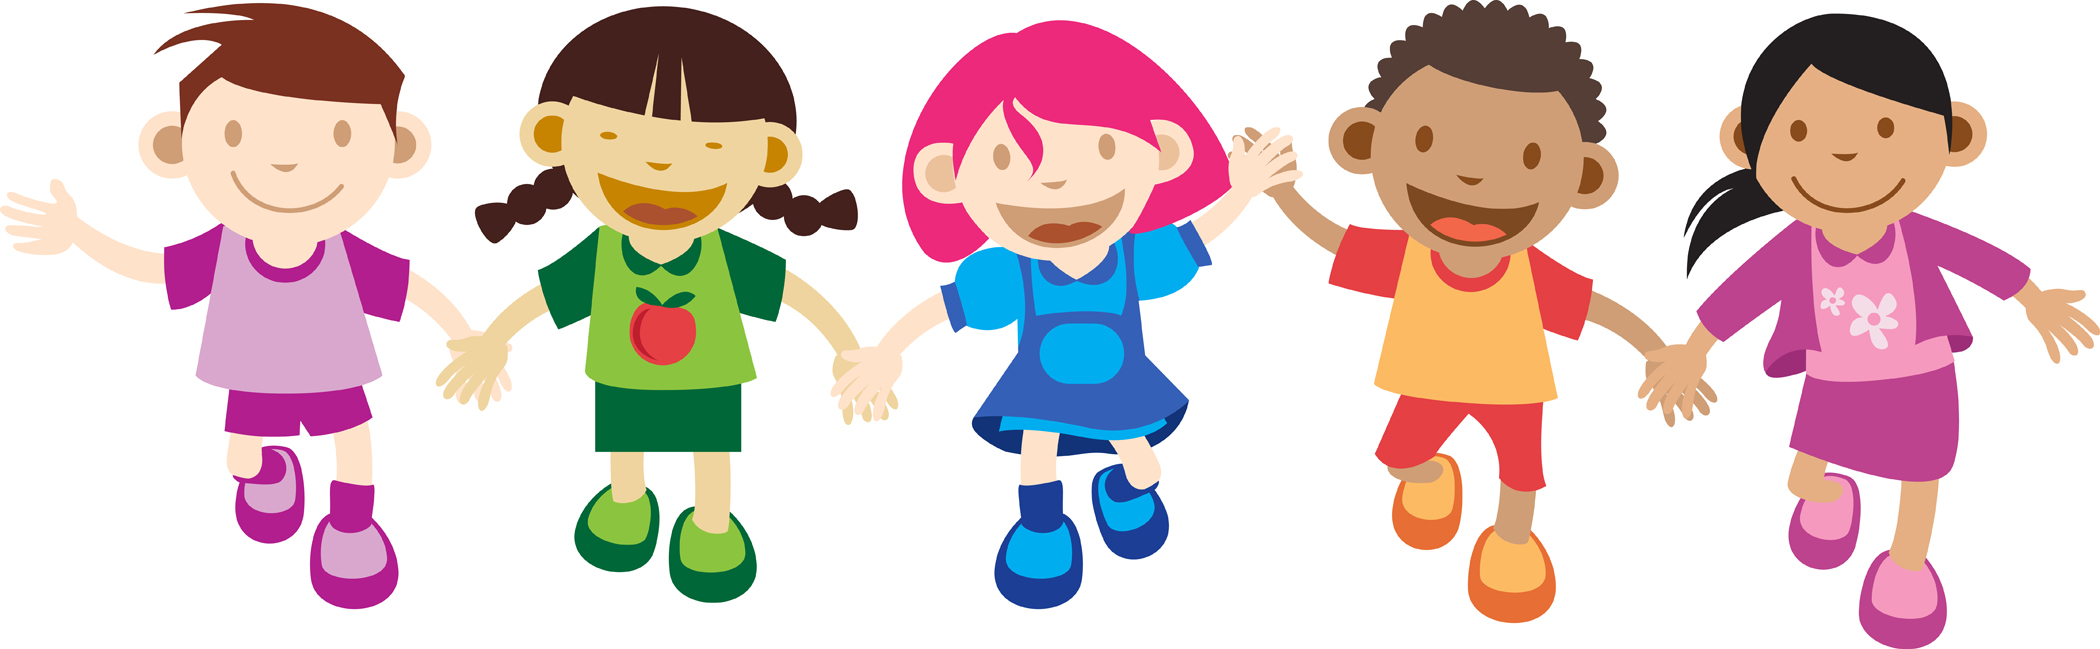 Free Children Cartoon Image, Download Free Children Cartoon Image png image, Free ClipArts on Clipart Library